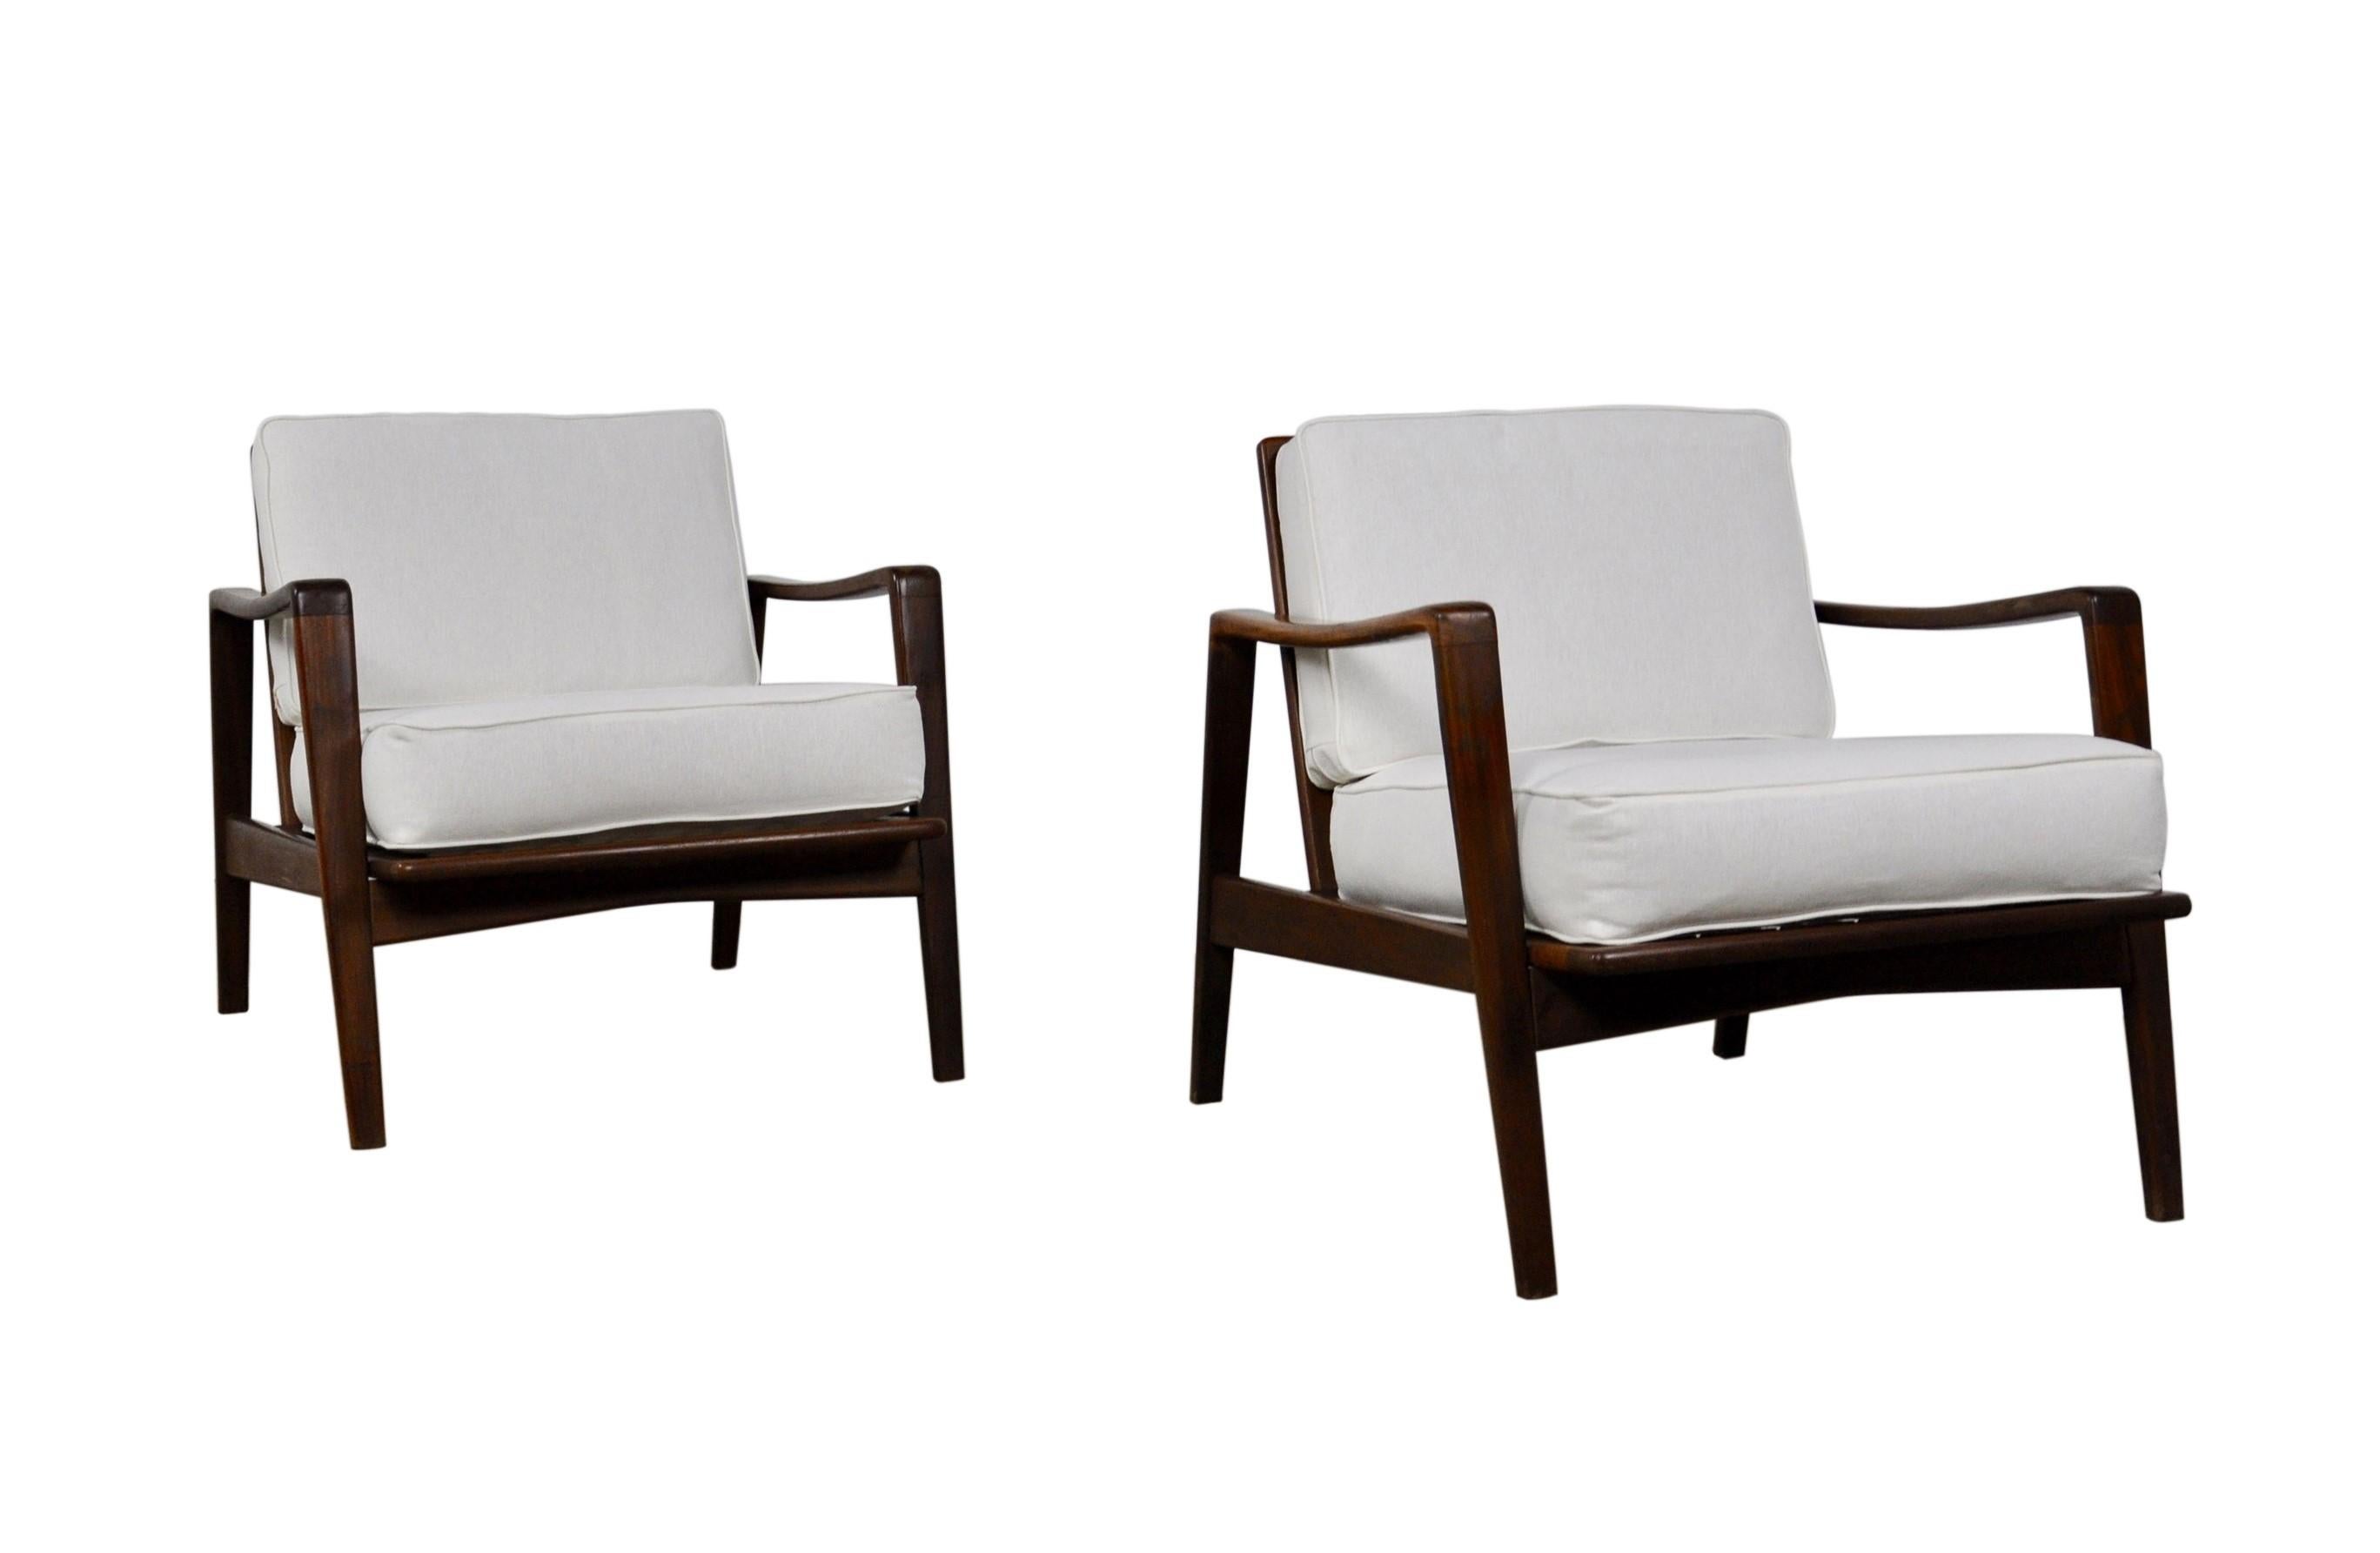 Pair of easy chairs model no. 30 designed by Arne Wahl Iversen, manufactured by Komfort, Denmark, 1960. These comfortable chairs have solid teak wooden frames and white upholstered cushions. Sculptural modern teak frames can be displayed at any